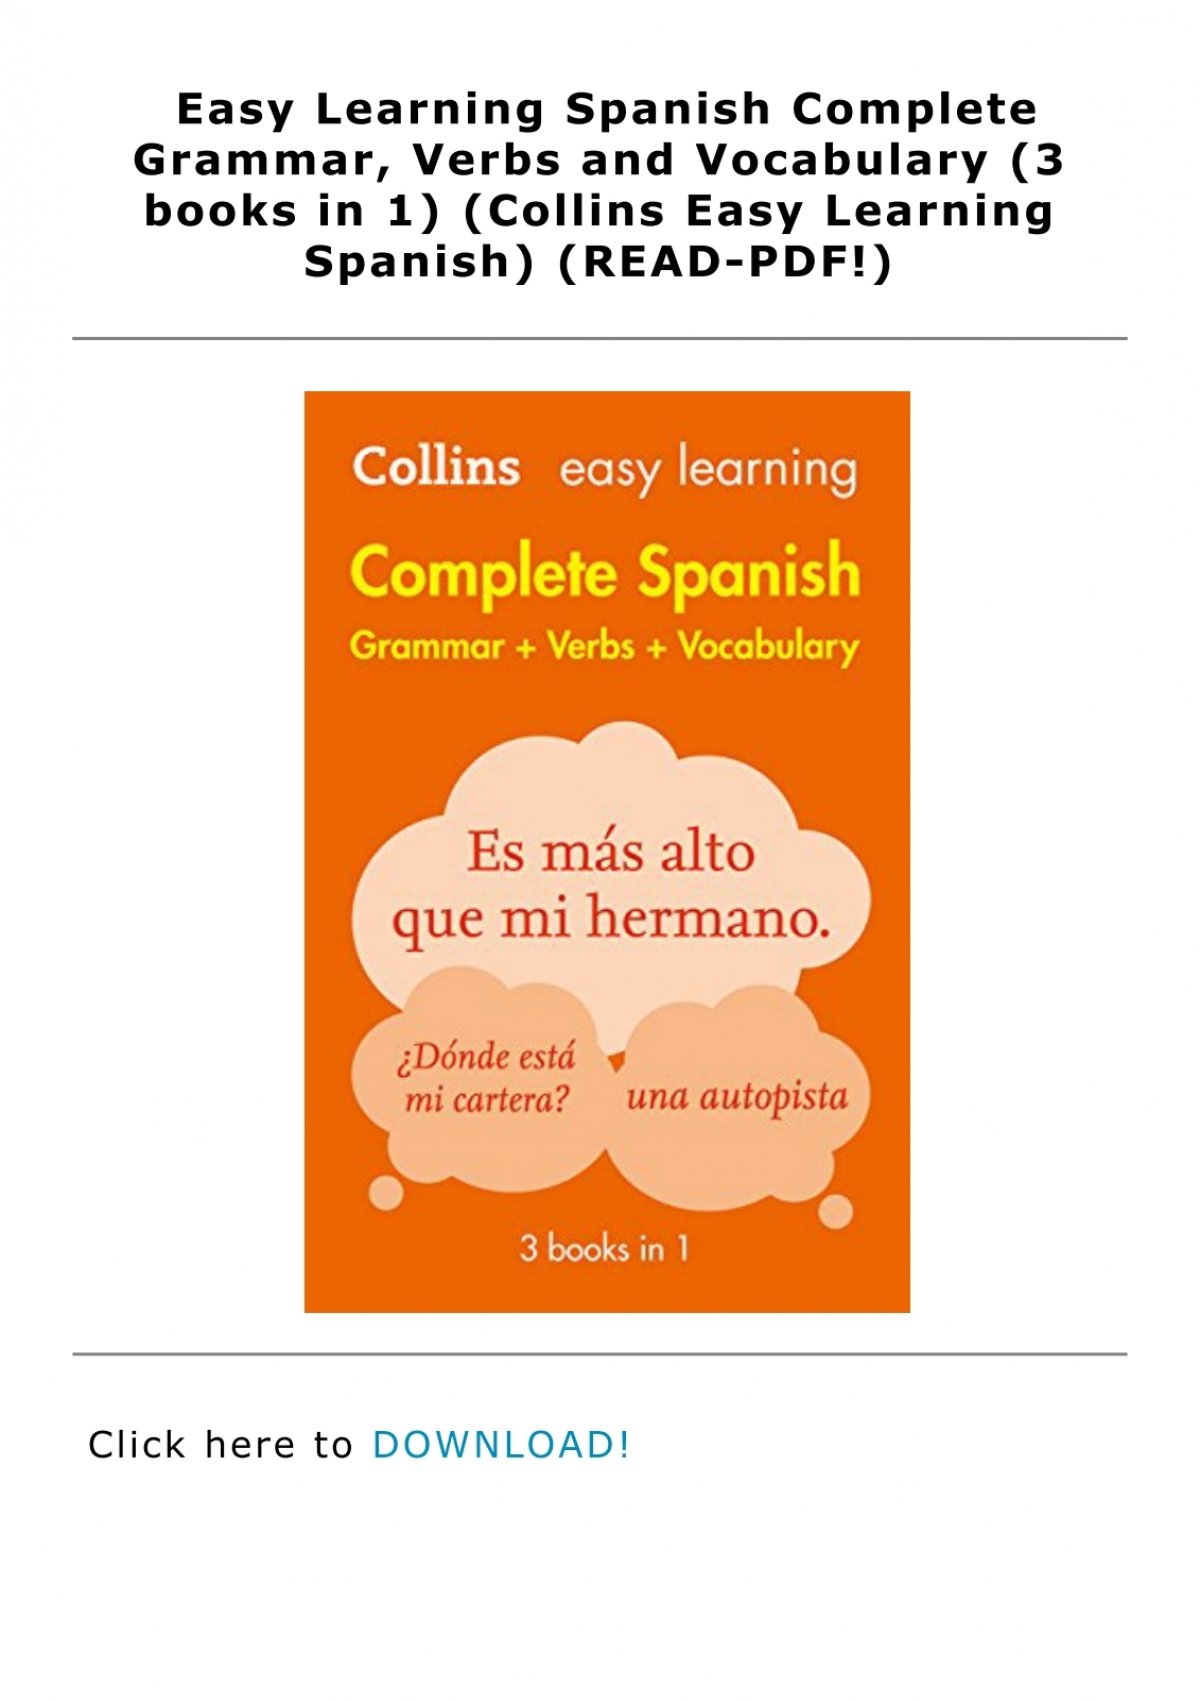 Easy Learning Spanish Complete Grammar Verbs And Vocabulary 3 Books In 1 Collins Easy Learning Spanish Read Pdf